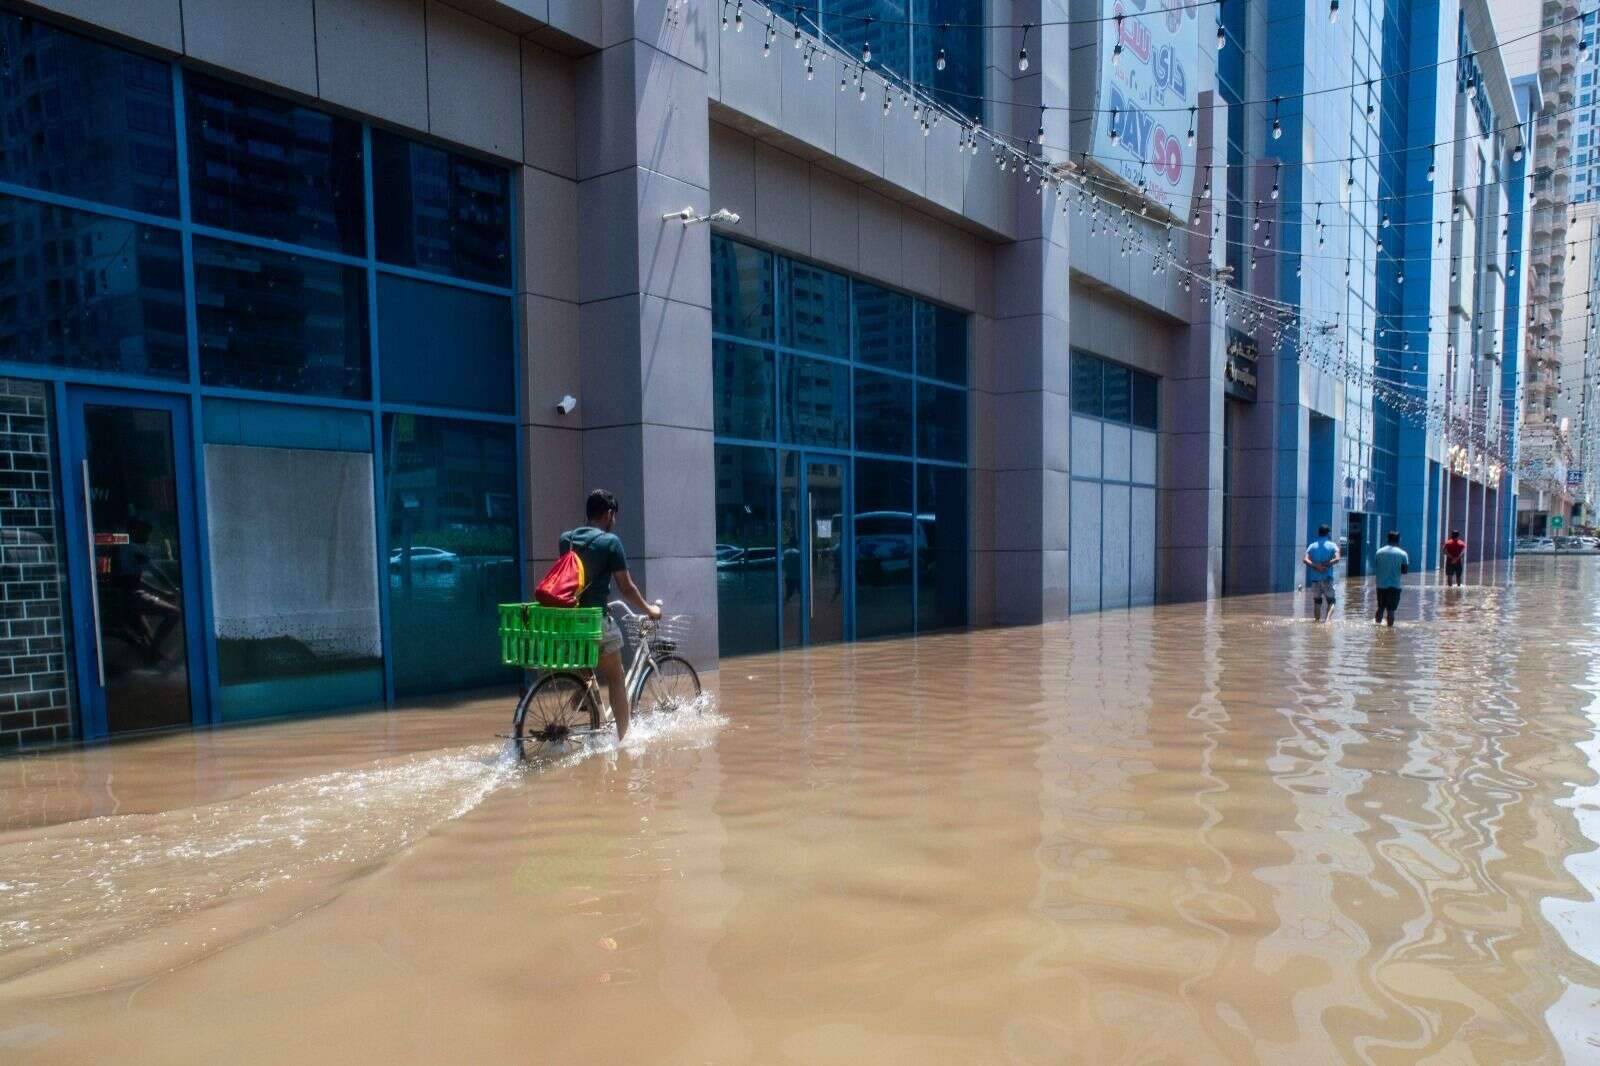 uae: adverse weather conditions caused by climate change, environmental expert says